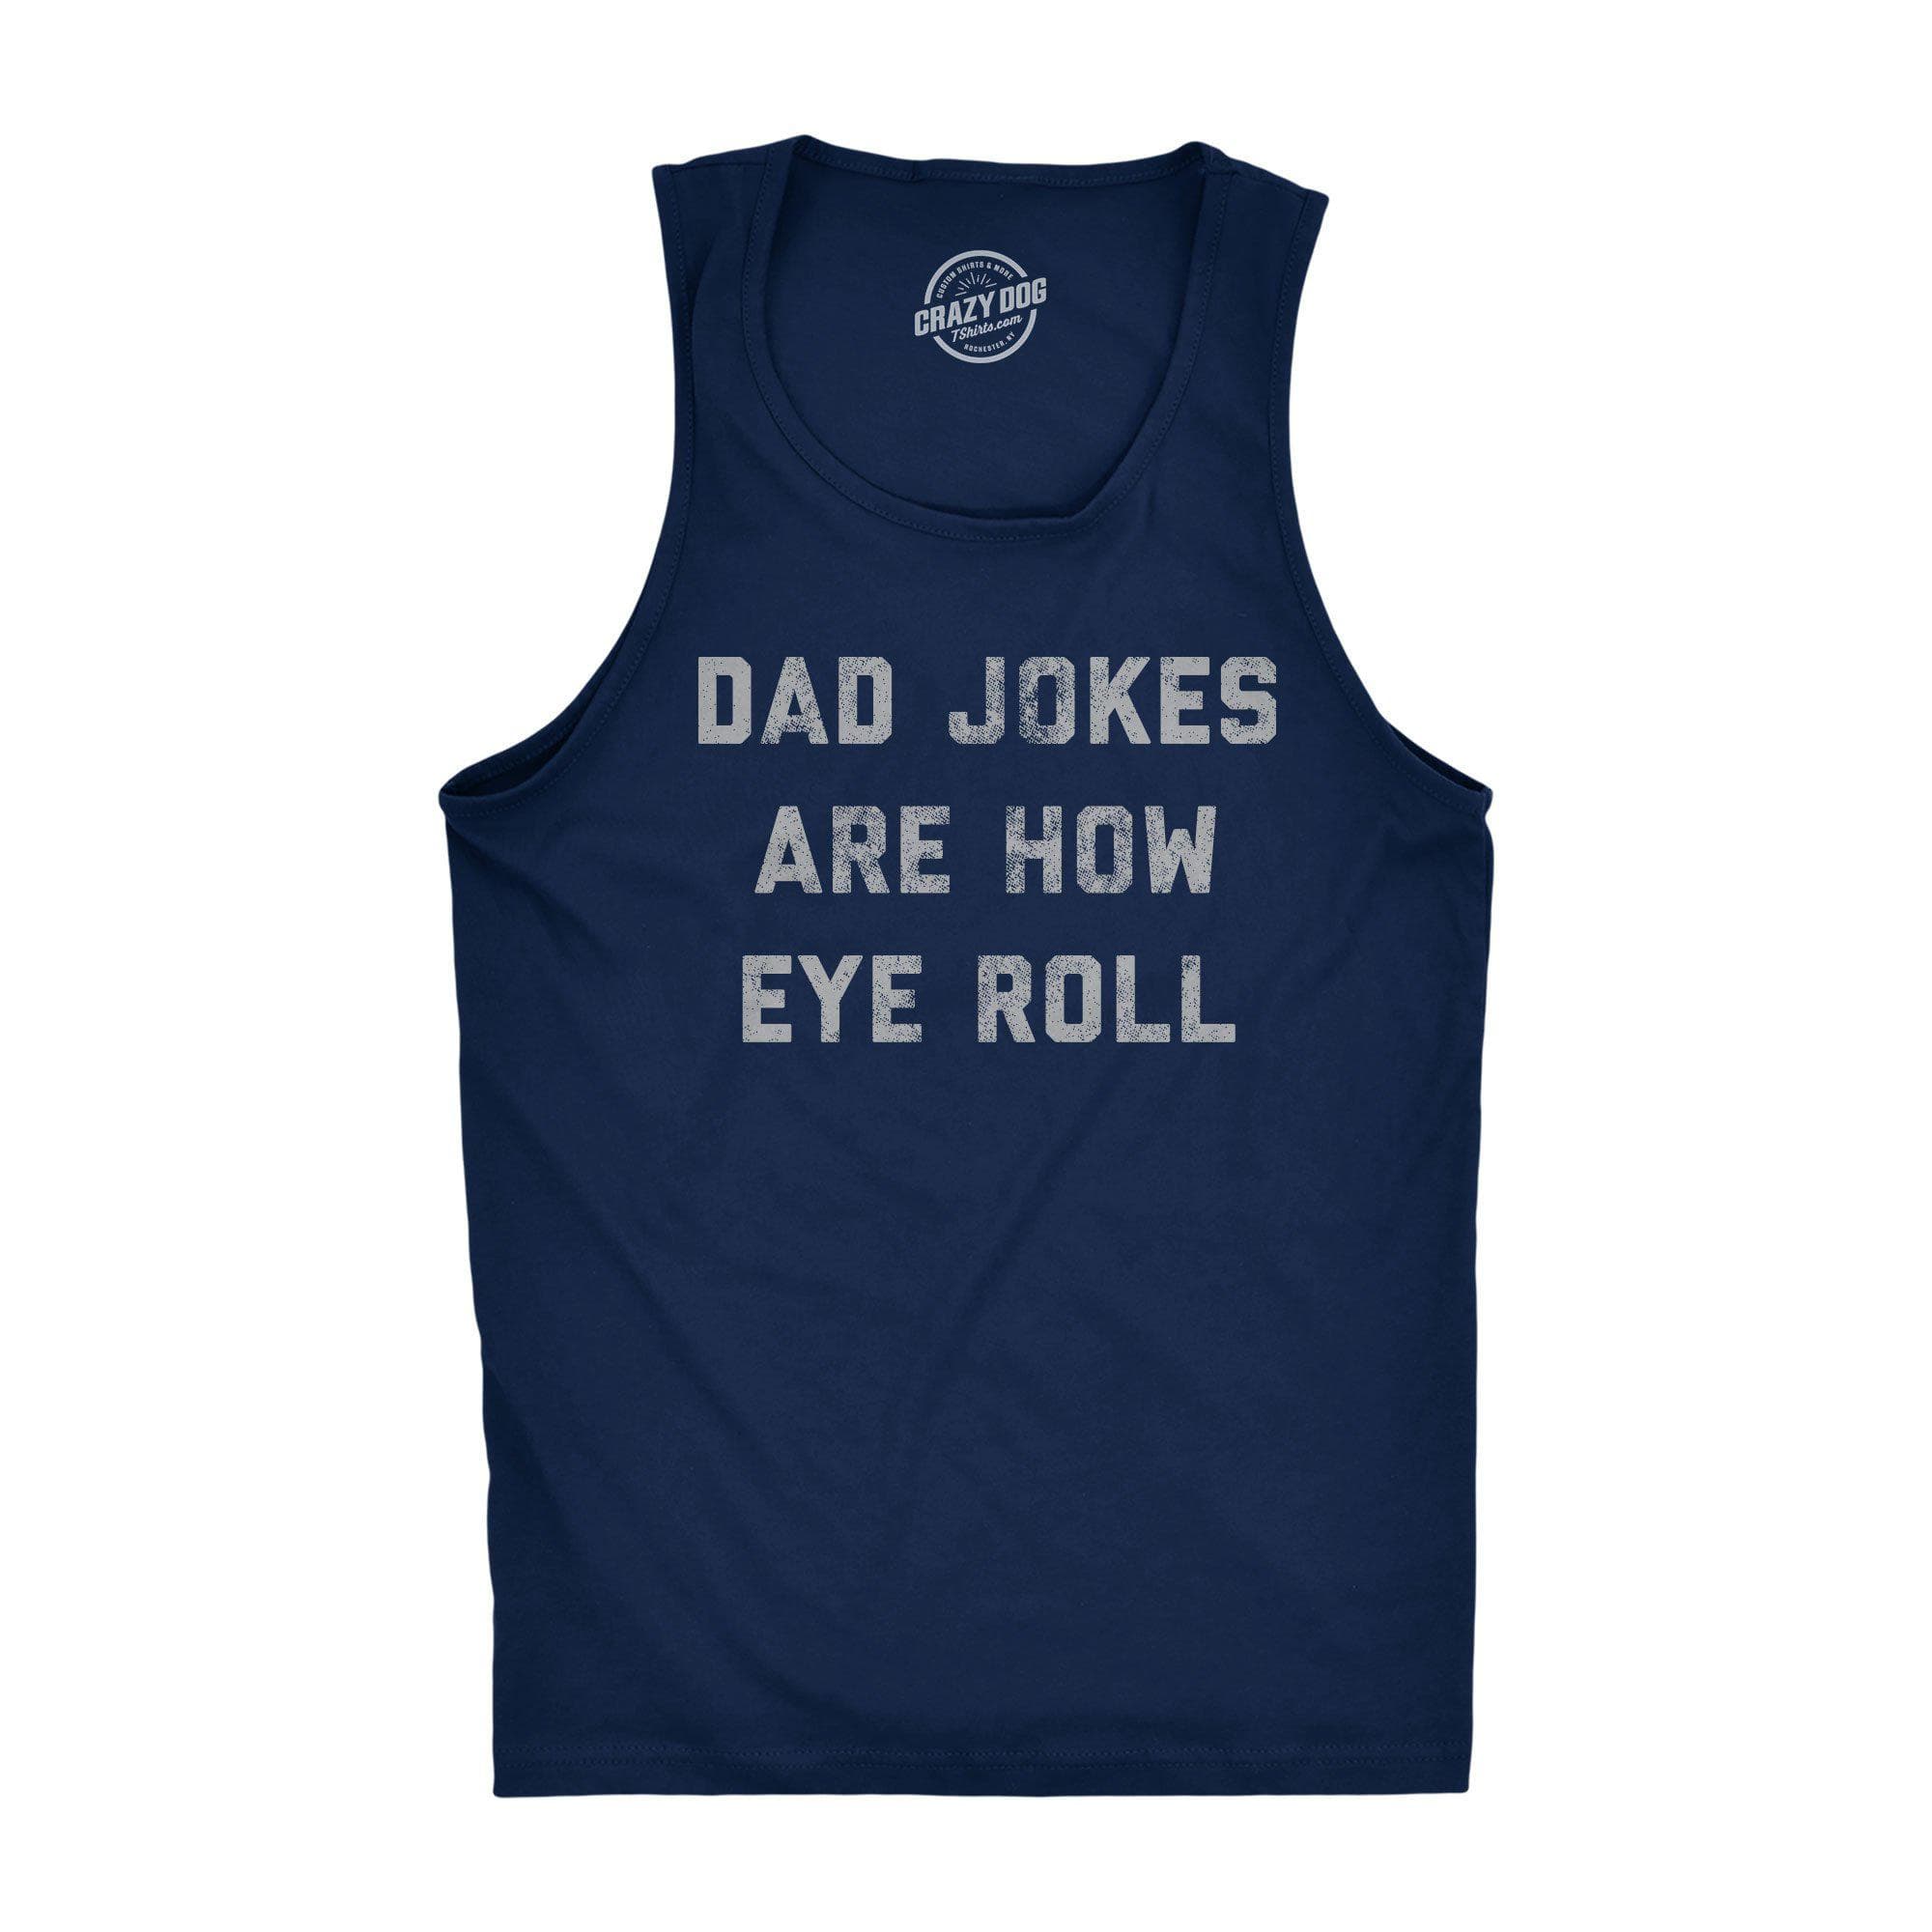 Dad Jokes Are How Eye Roll Men's Tank Top - Crazy Dog T-Shirts